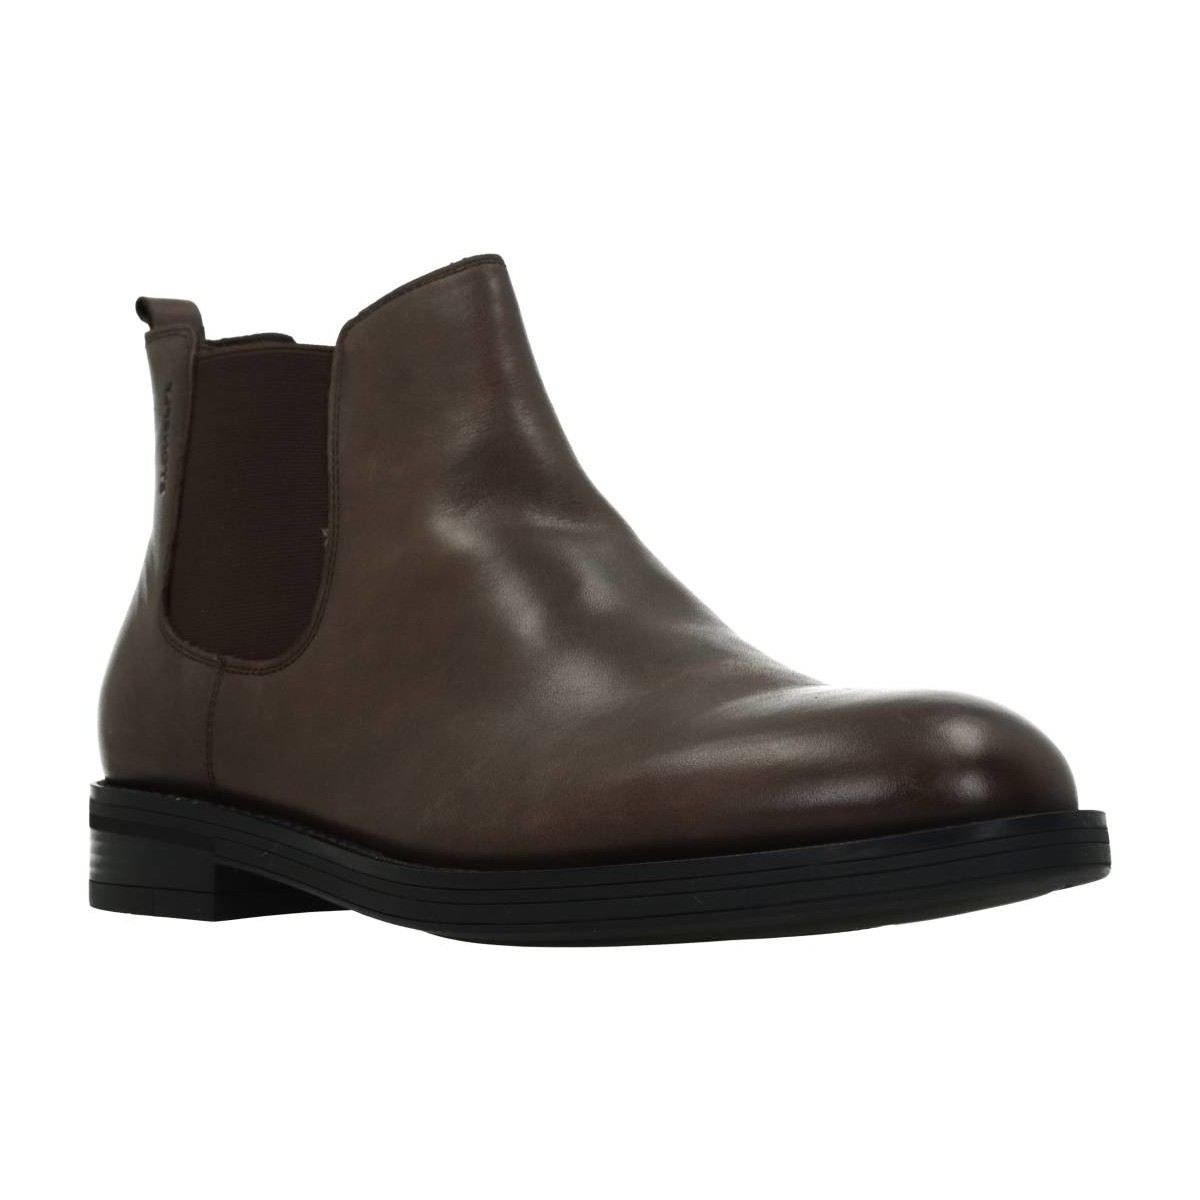 Chaussures Homme Bottes Stonefly CARNABY 5 CALF Marron